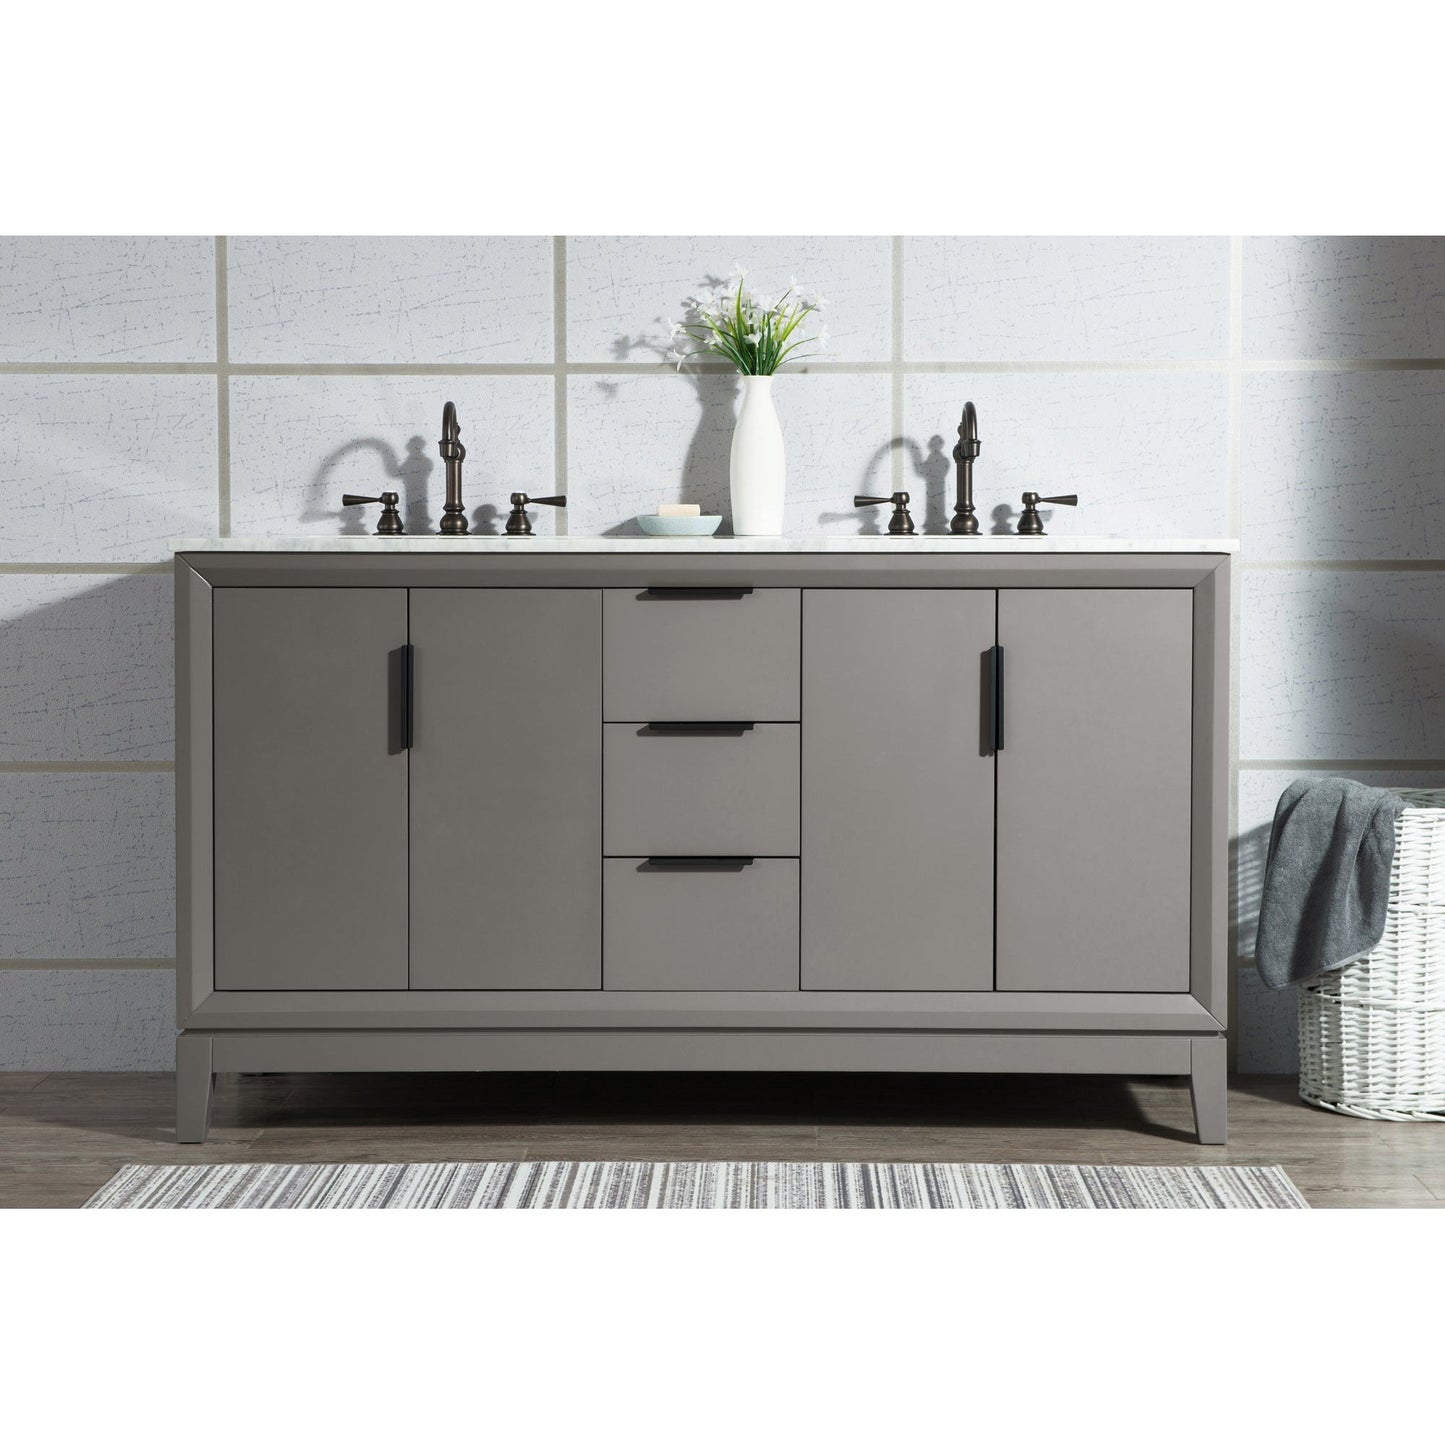 Water Creation Elizabeth 60" Double Sink Carrara White Marble Vanity In Cashmere Grey With F2-0012-03-TL Lavatory Faucet